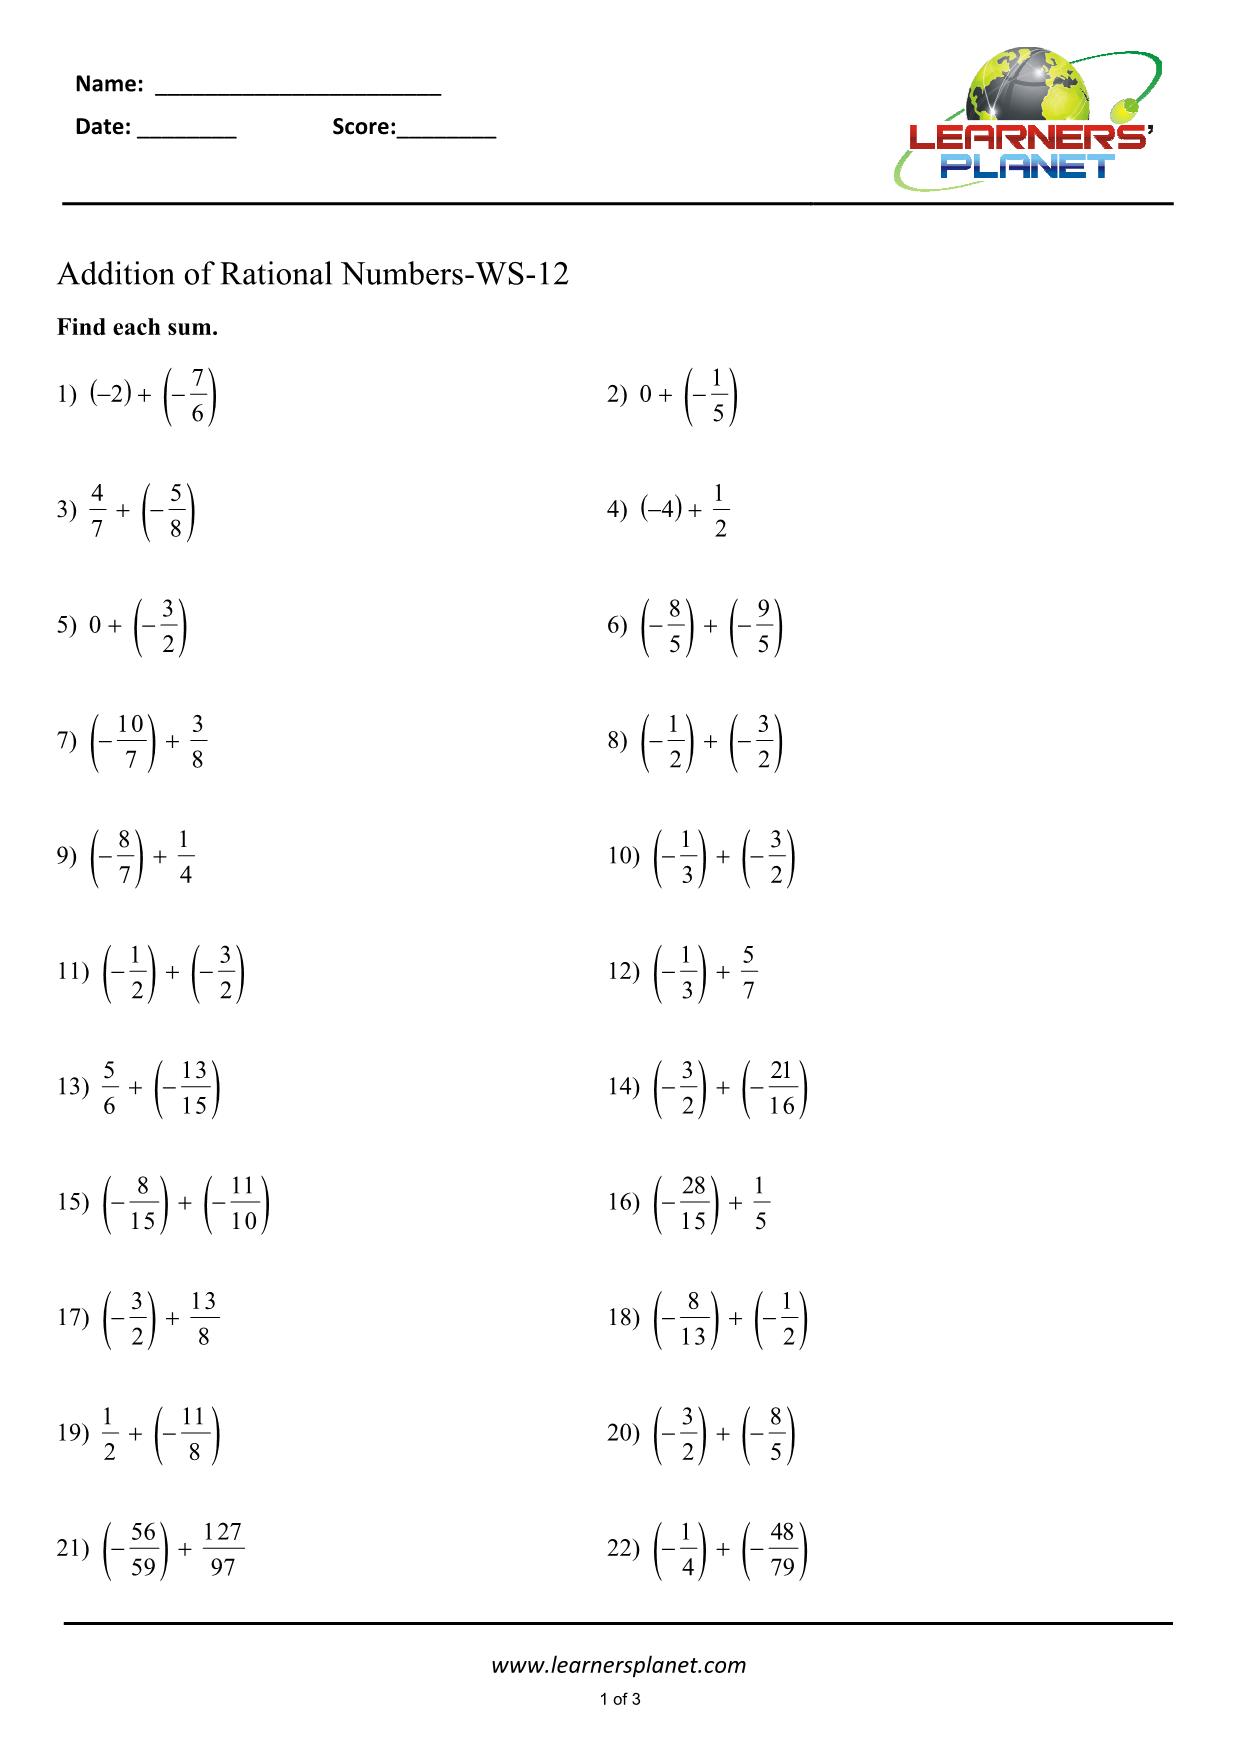 Worksheet on adding rational numbers 20th cbse In Adding Rational Numbers Worksheet